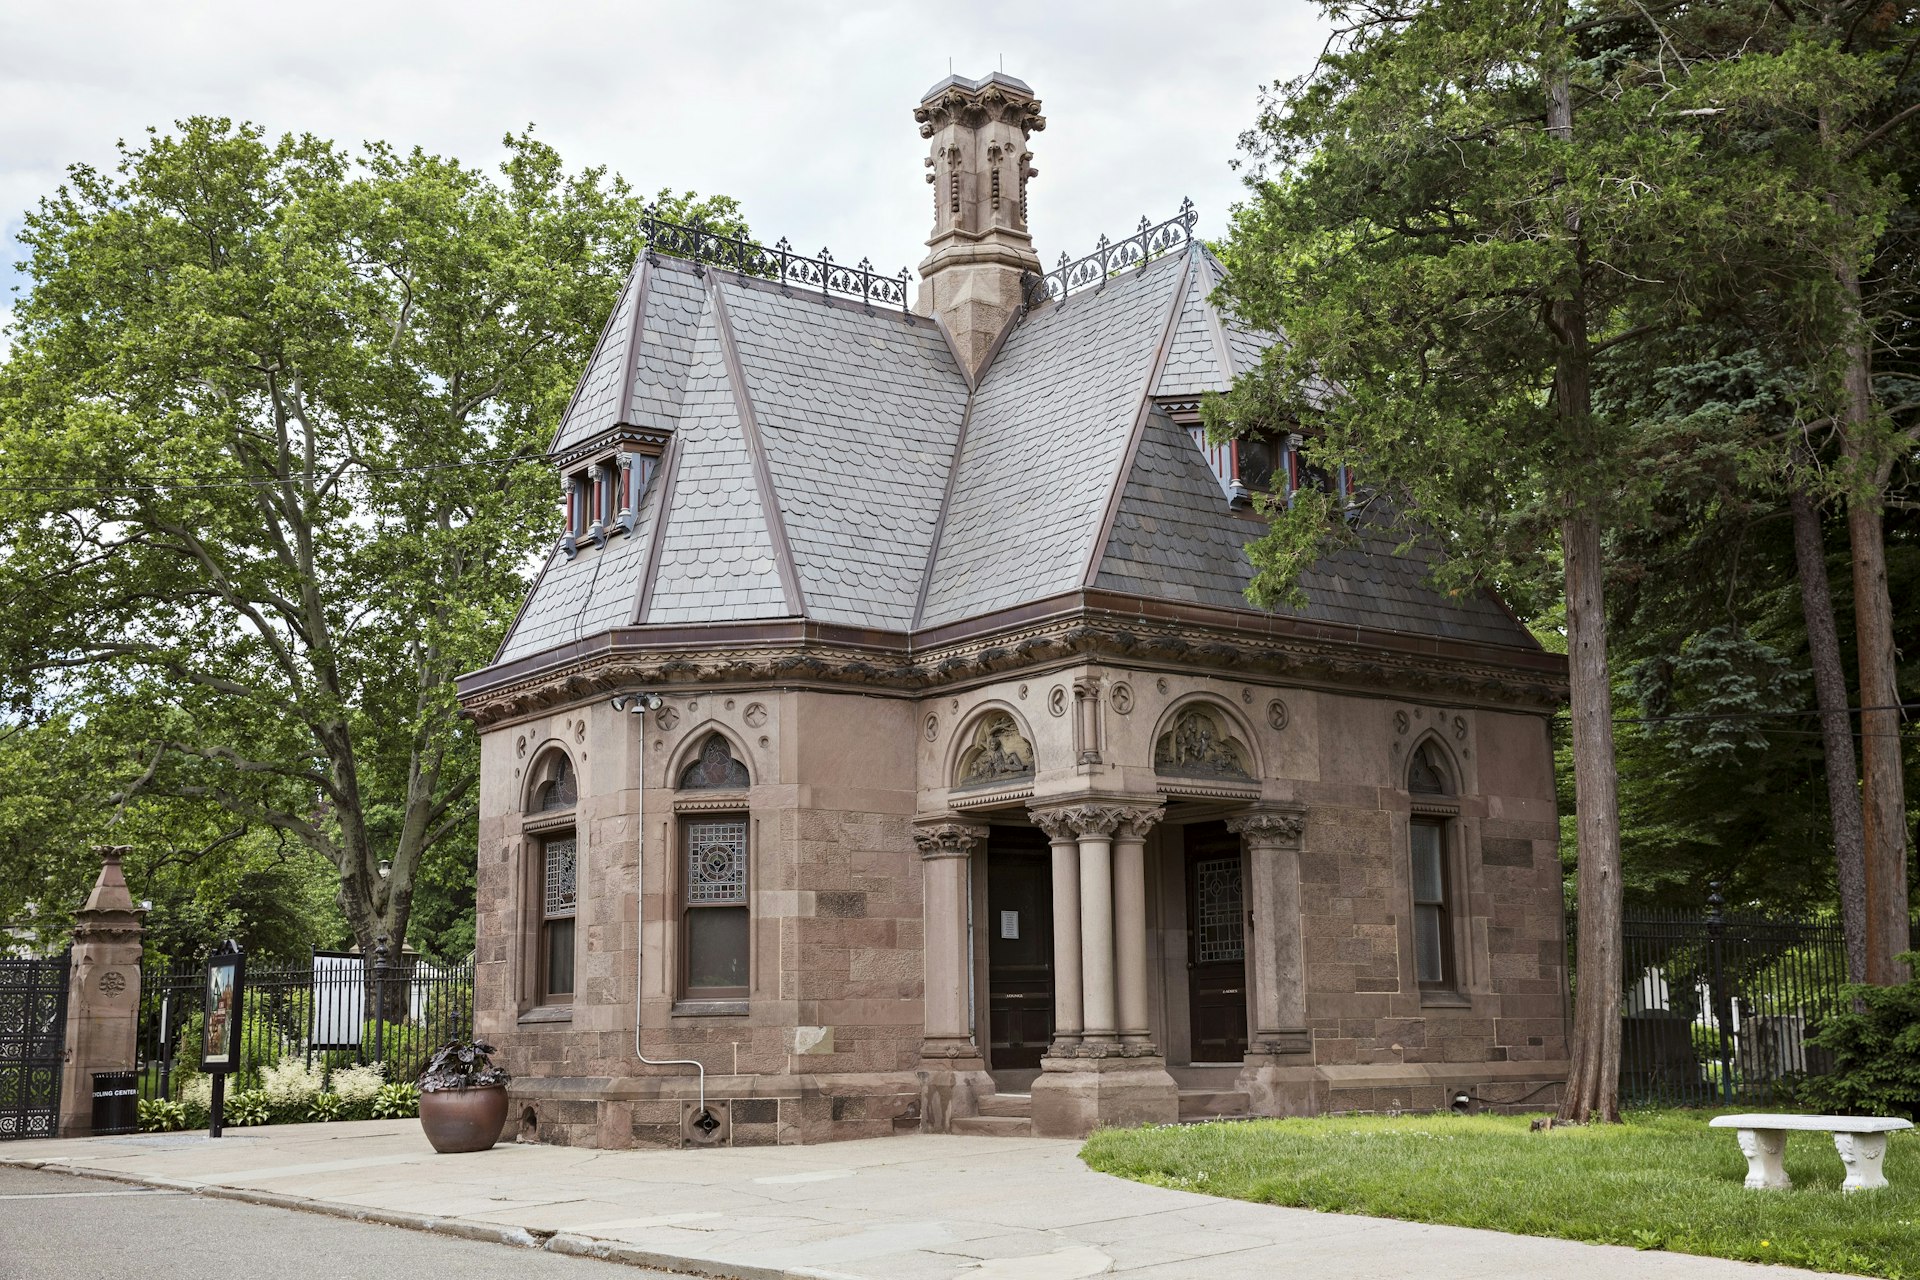 The gatehouse at Green-Wood Cemetery